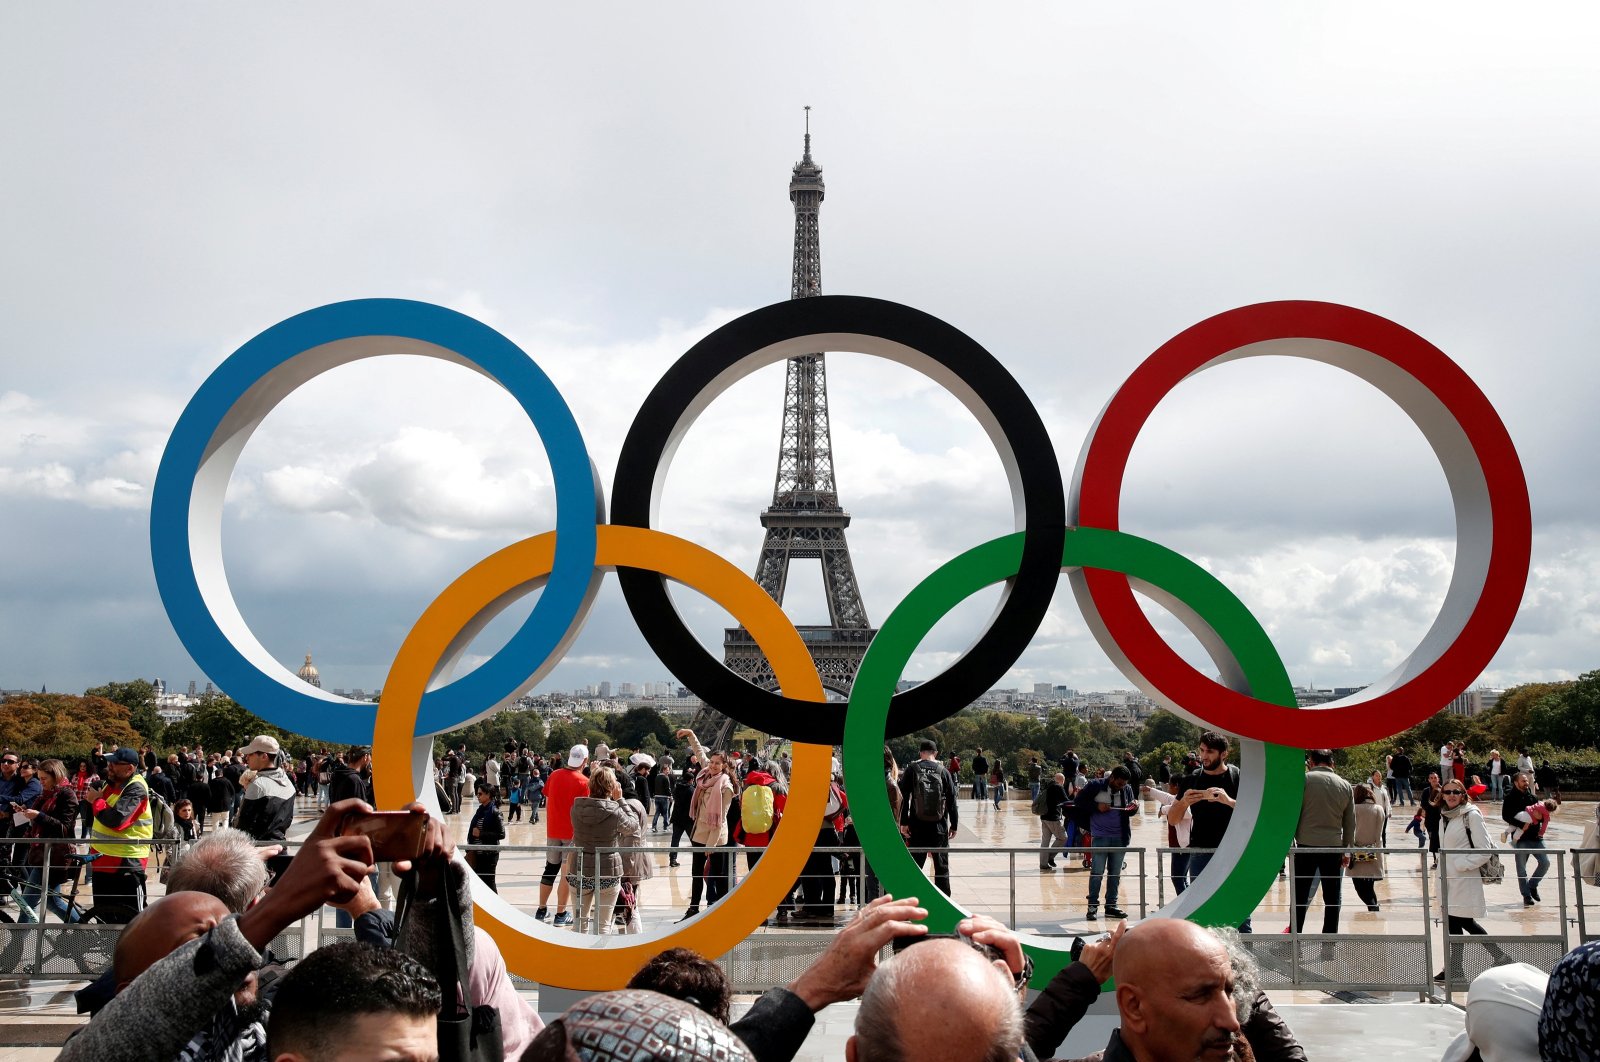 Olympic rings to celebrate the IOC official announcement that Paris won the 2024 Olympic bid are seen in front of the Eiffel Tower at the Trocadero square, Paris, France, Sept. 16, 2017. (Reuters Photo)